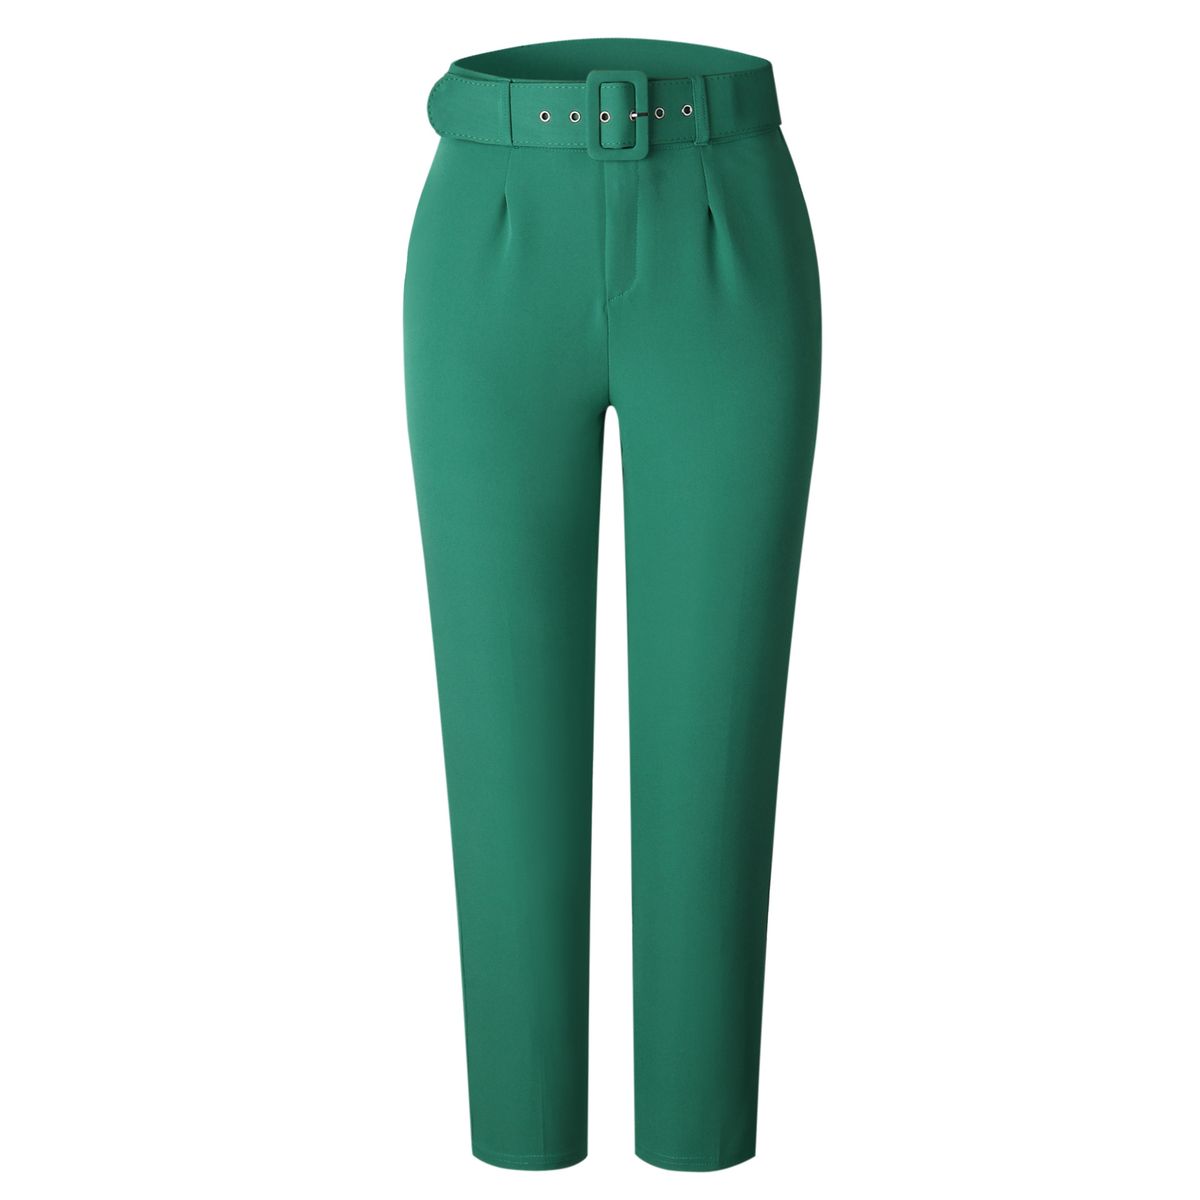 high waist formal pants for ladies Hot Sale - OFF 66%